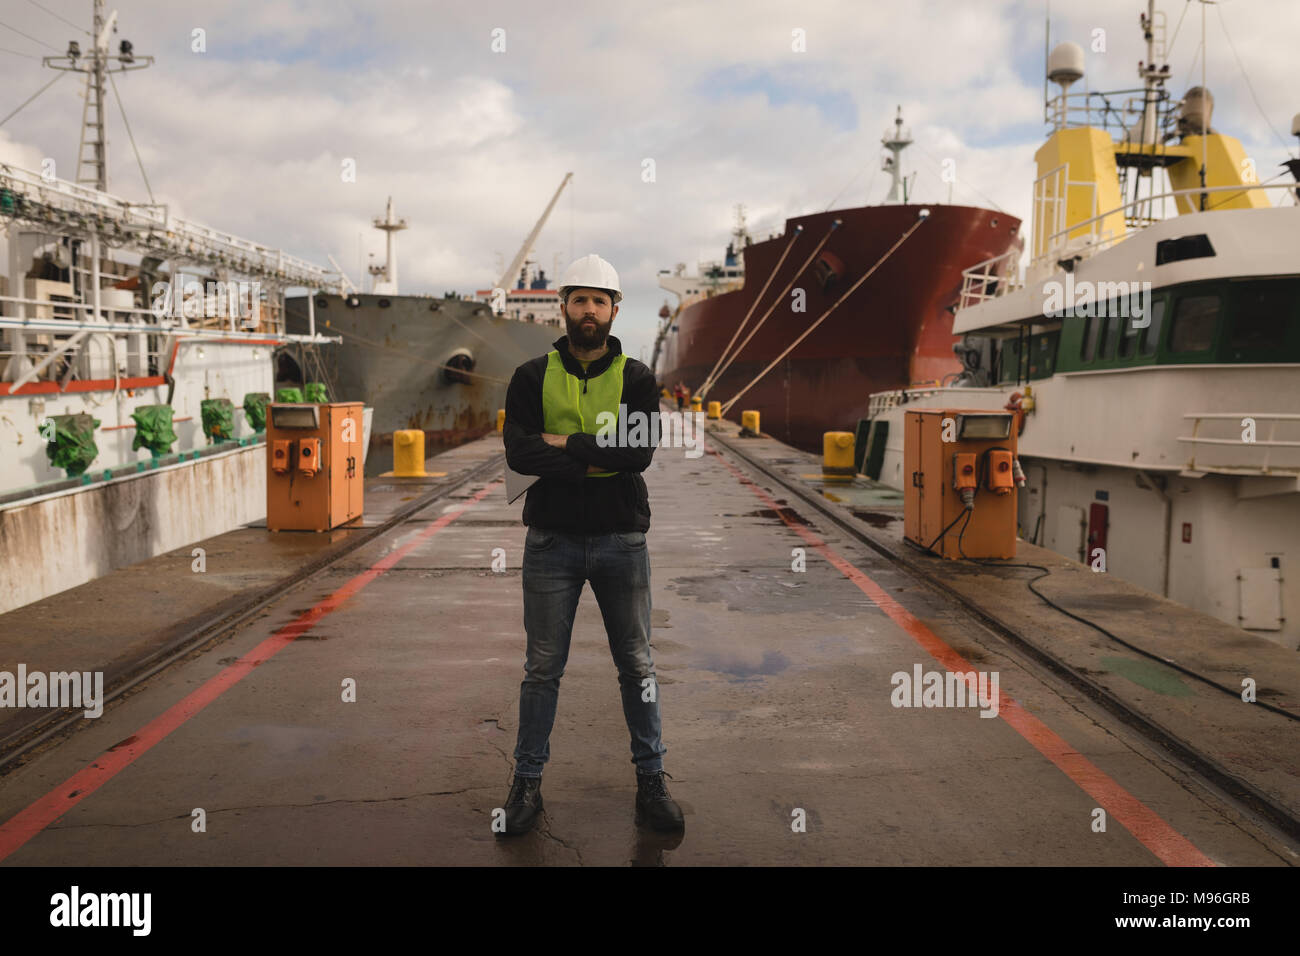 Dock worker standing with arms crossed in shipyard Stock Photo